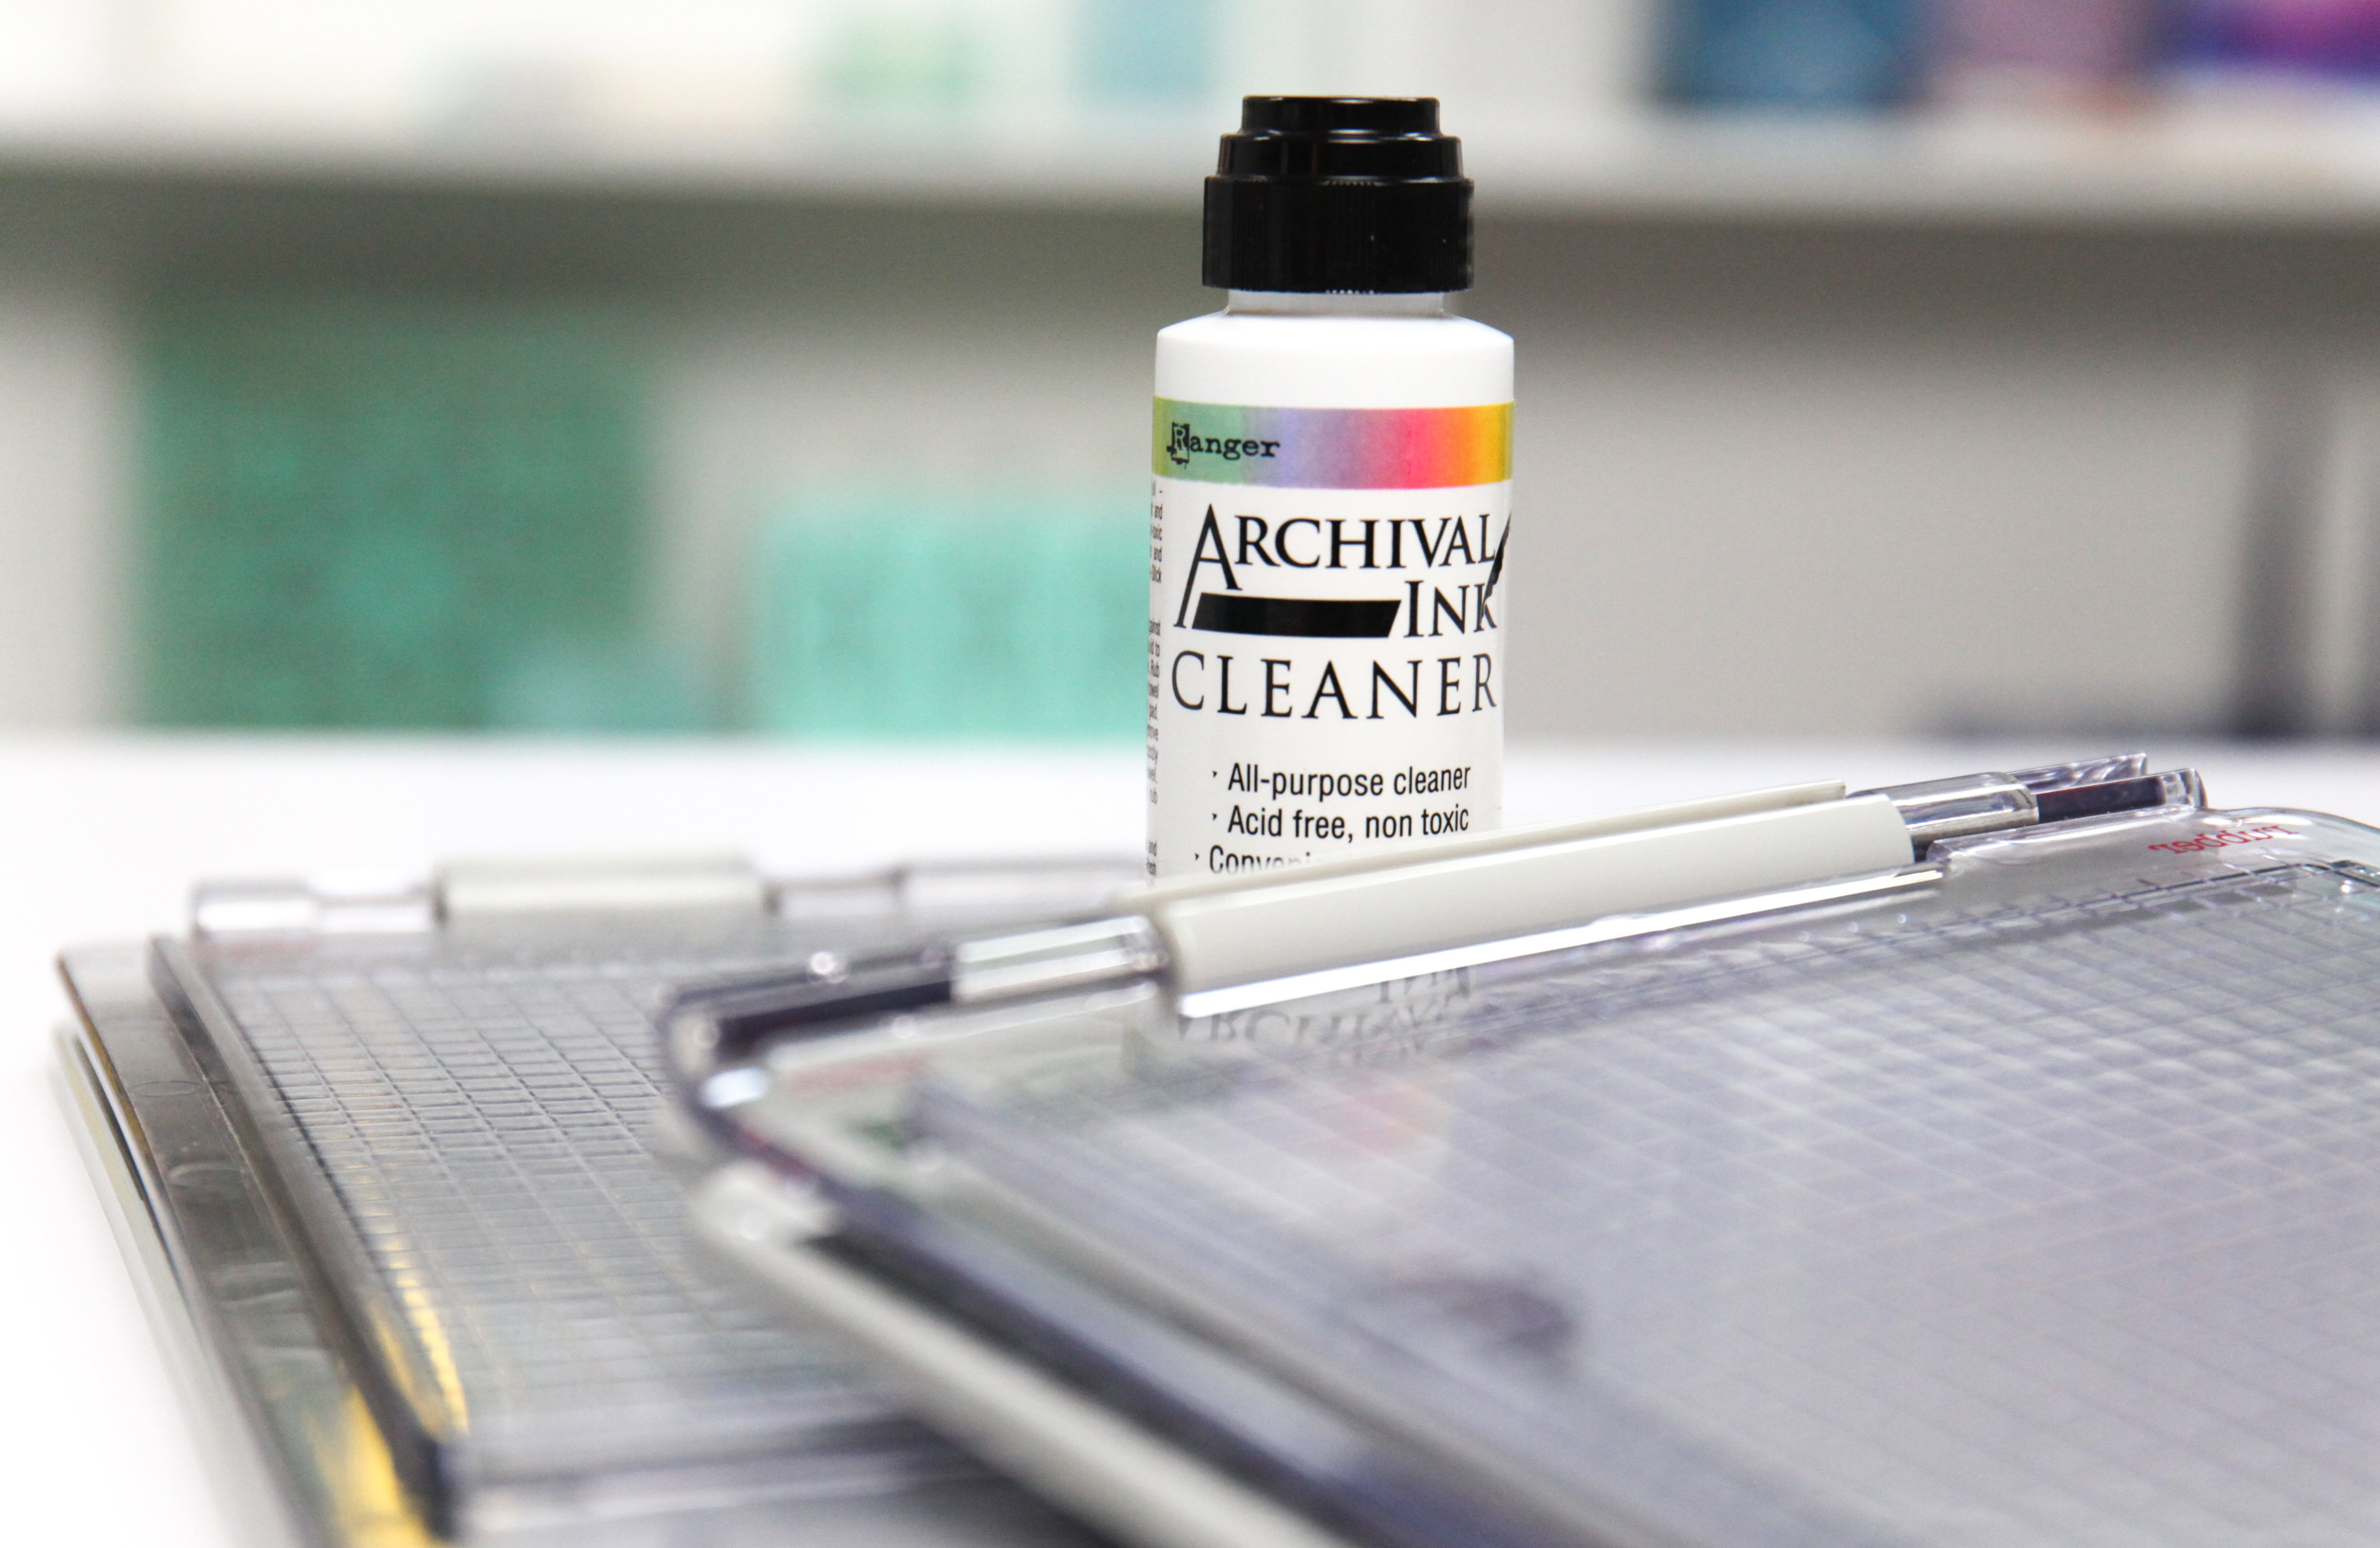 Read This Before You Clean Your Craft Supplies!